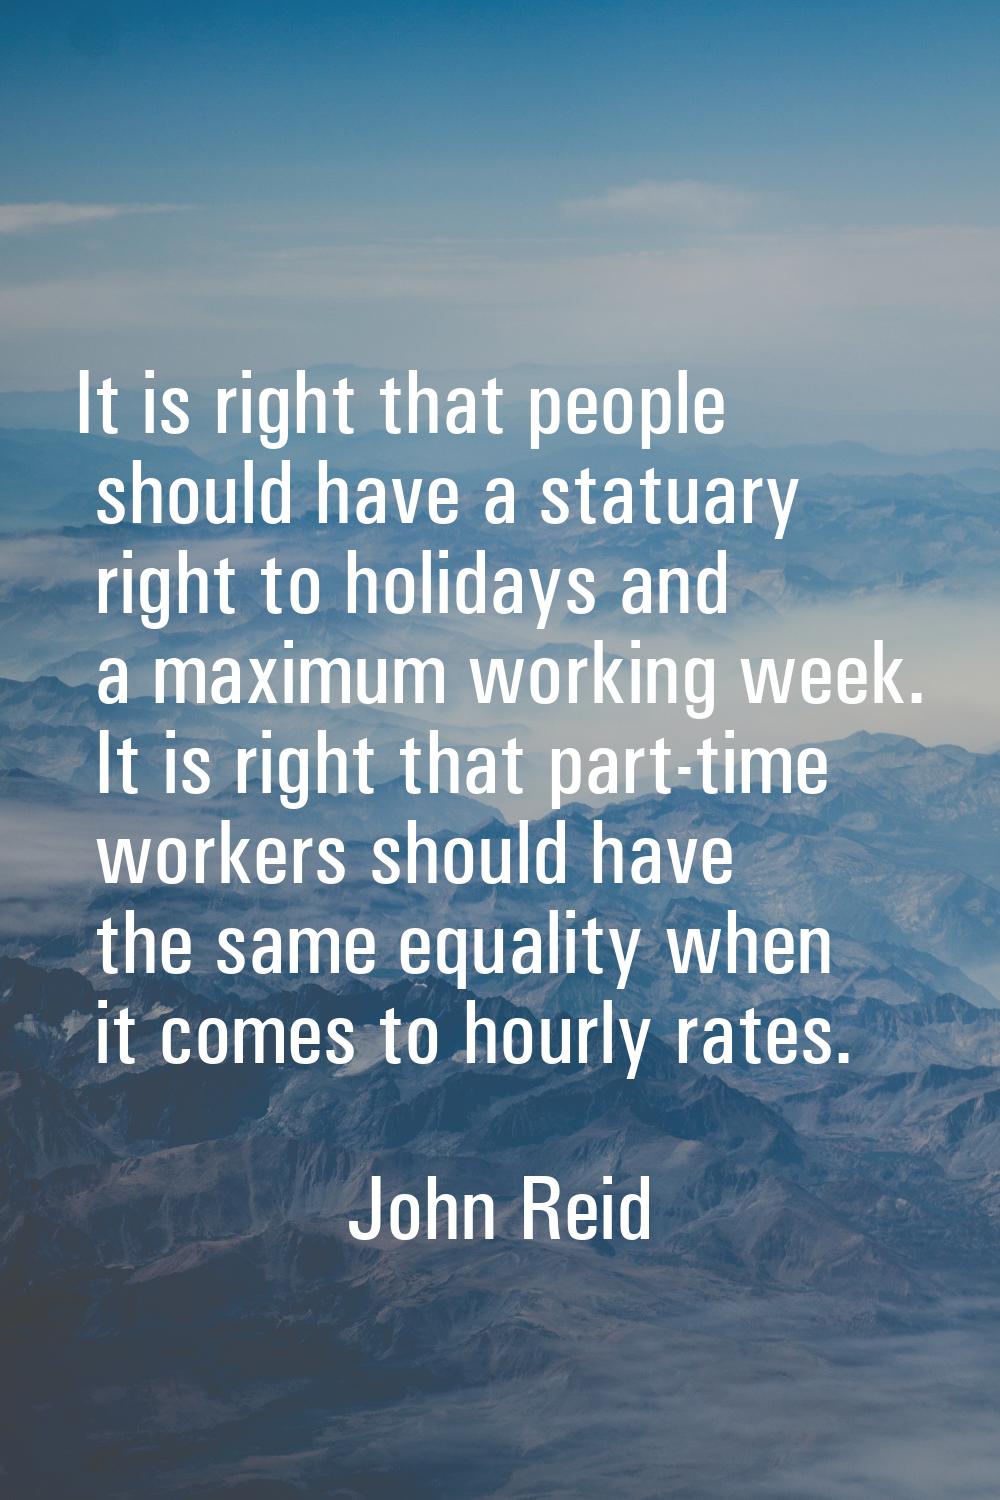 It is right that people should have a statuary right to holidays and a maximum working week. It is 